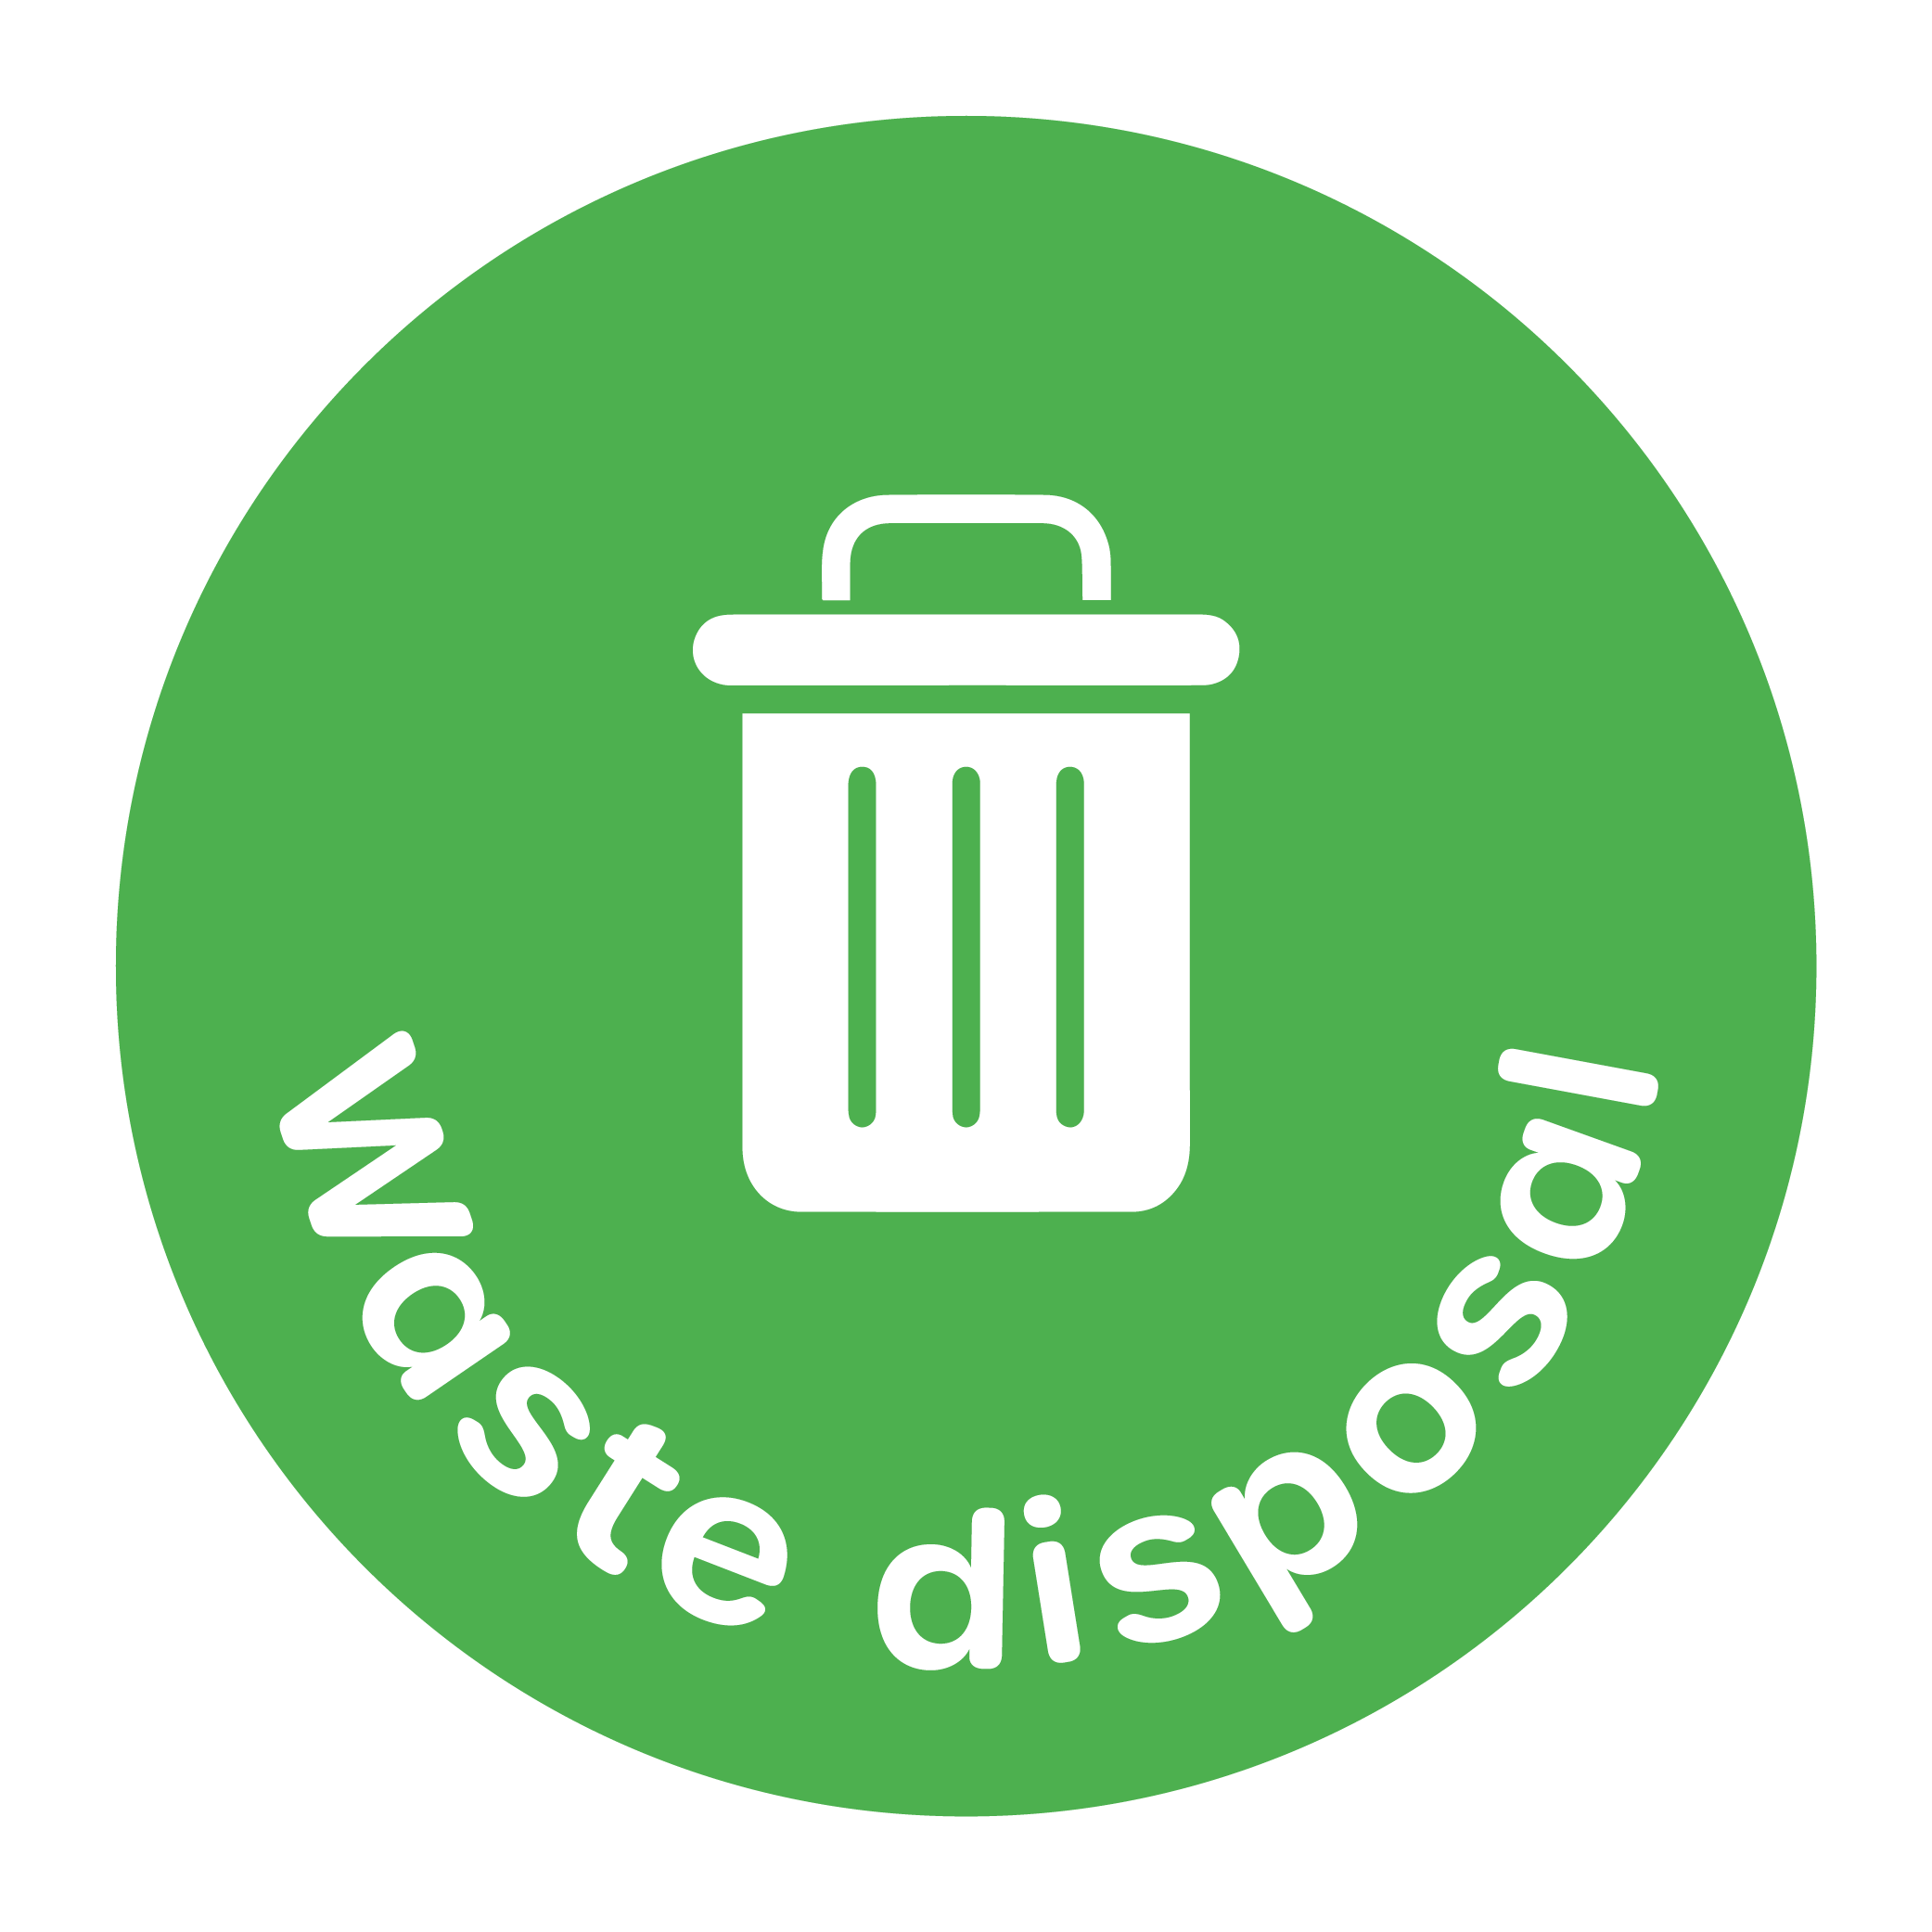 Waste as a resource. We close the loop.